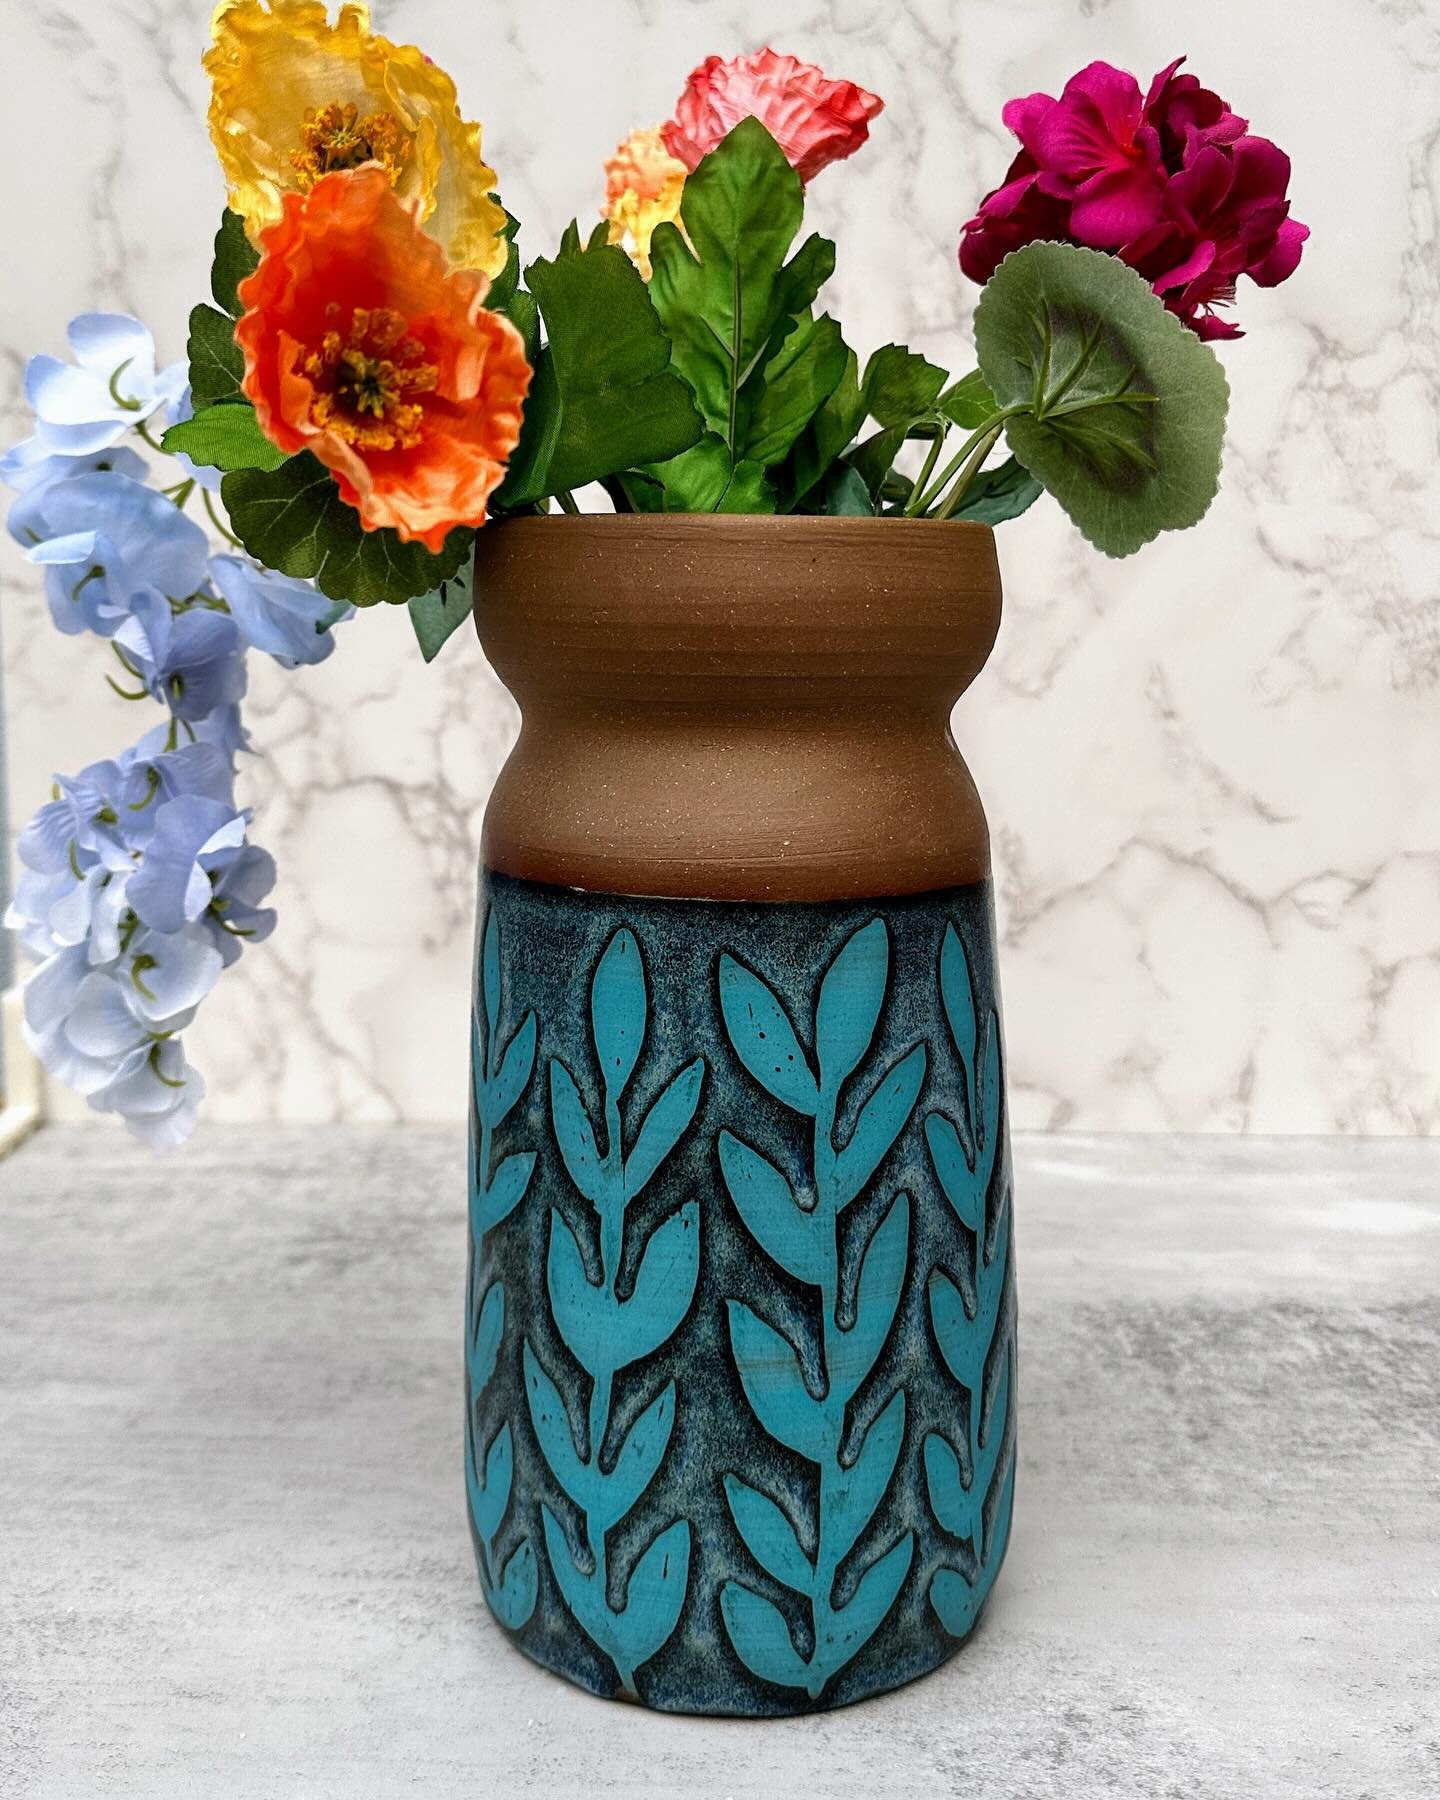 Vase Cintr&eacute; #4. Large vase in Aqua, Blue Rutile, and Bright Yellow. 

This tall bright one (and the cup I made to test this design) found their home this past weekend. I know they will be cherished! 

#pottery #ceramics #handmade #aqua #bright